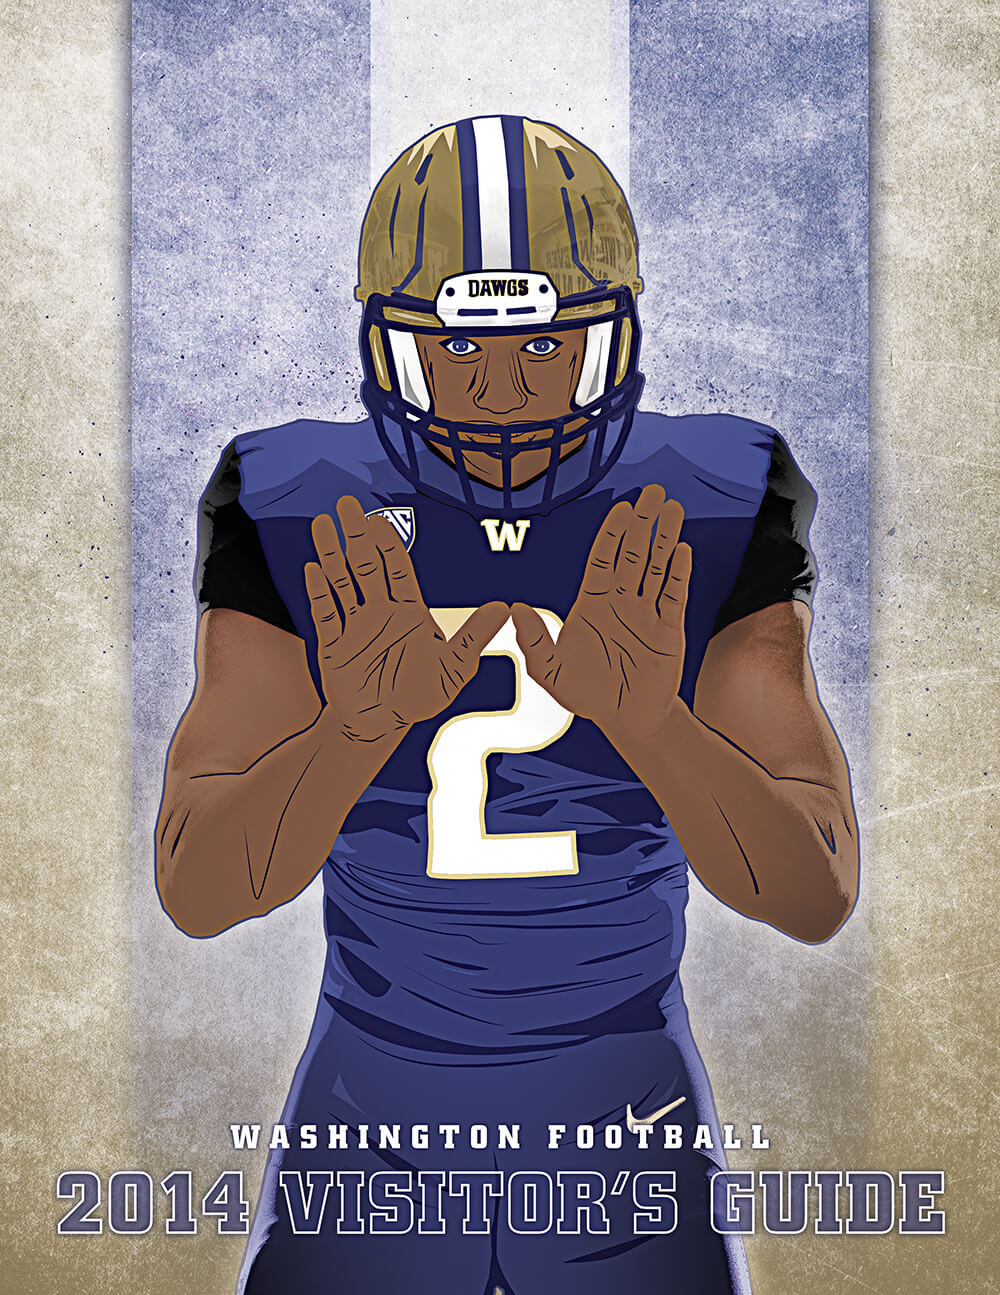 University of Washington football visitor's guide cover